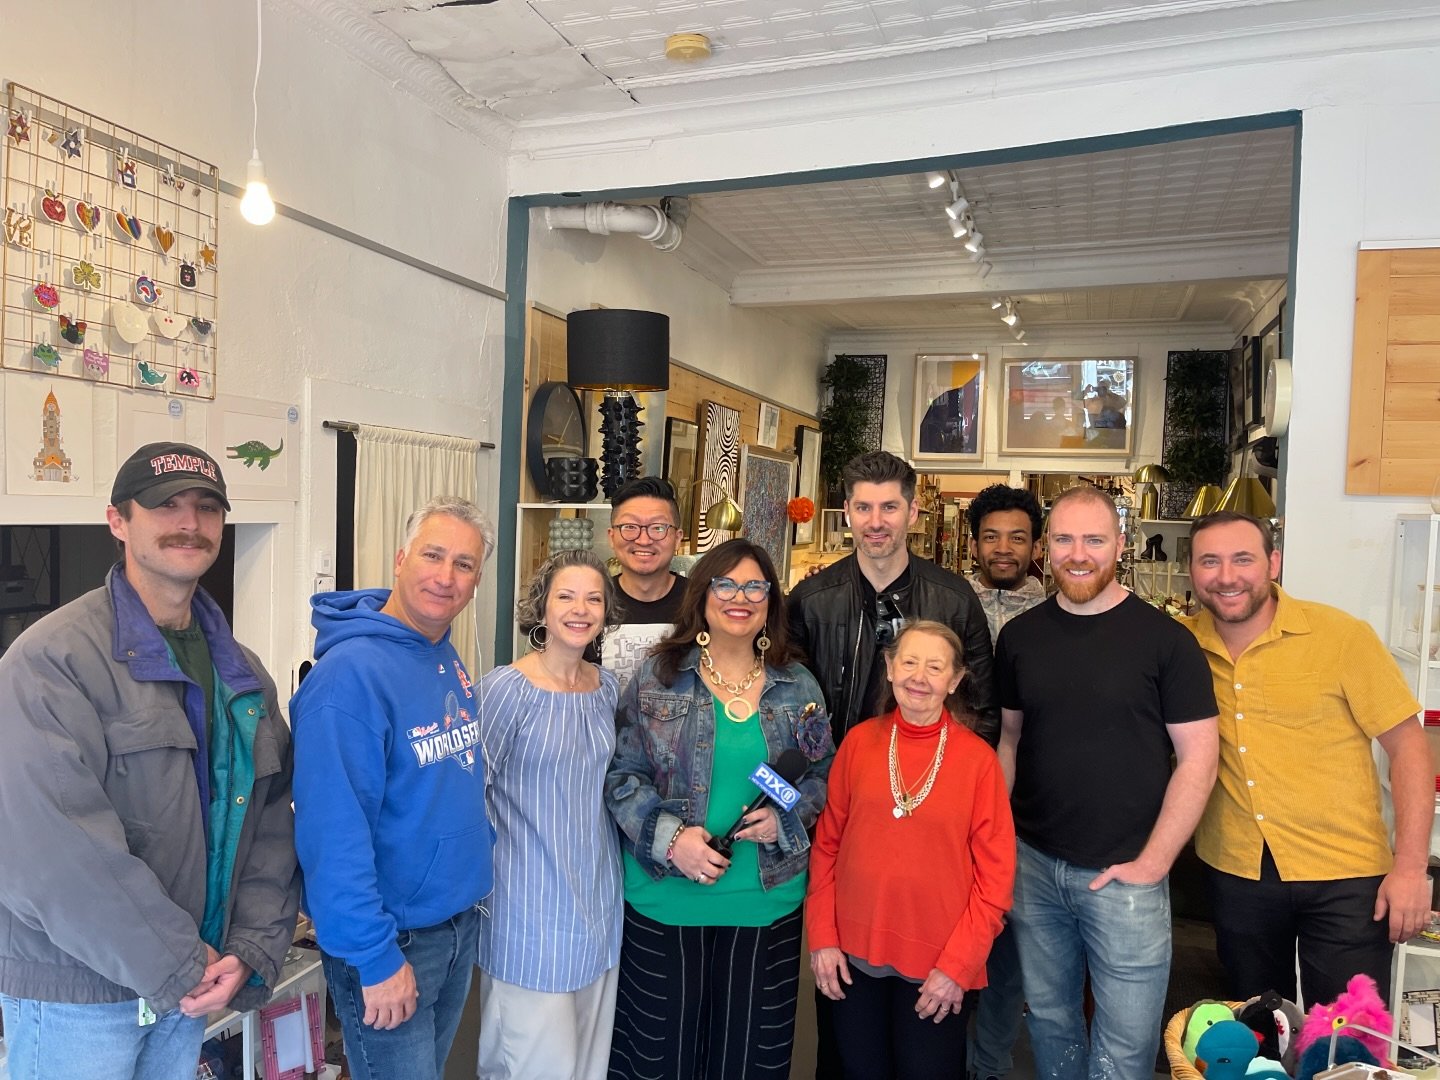 So this happened today. 
.
Thank you @pix11news and @benaarontv for coming out today. 
.
You featured such a great town of Cold Spring. 
.
Stop by the pop up until May 31! 
.
50 Main St
.
.
.
#popupshop #nymakers #coldspring #pix11 #mainstreetusa #sh